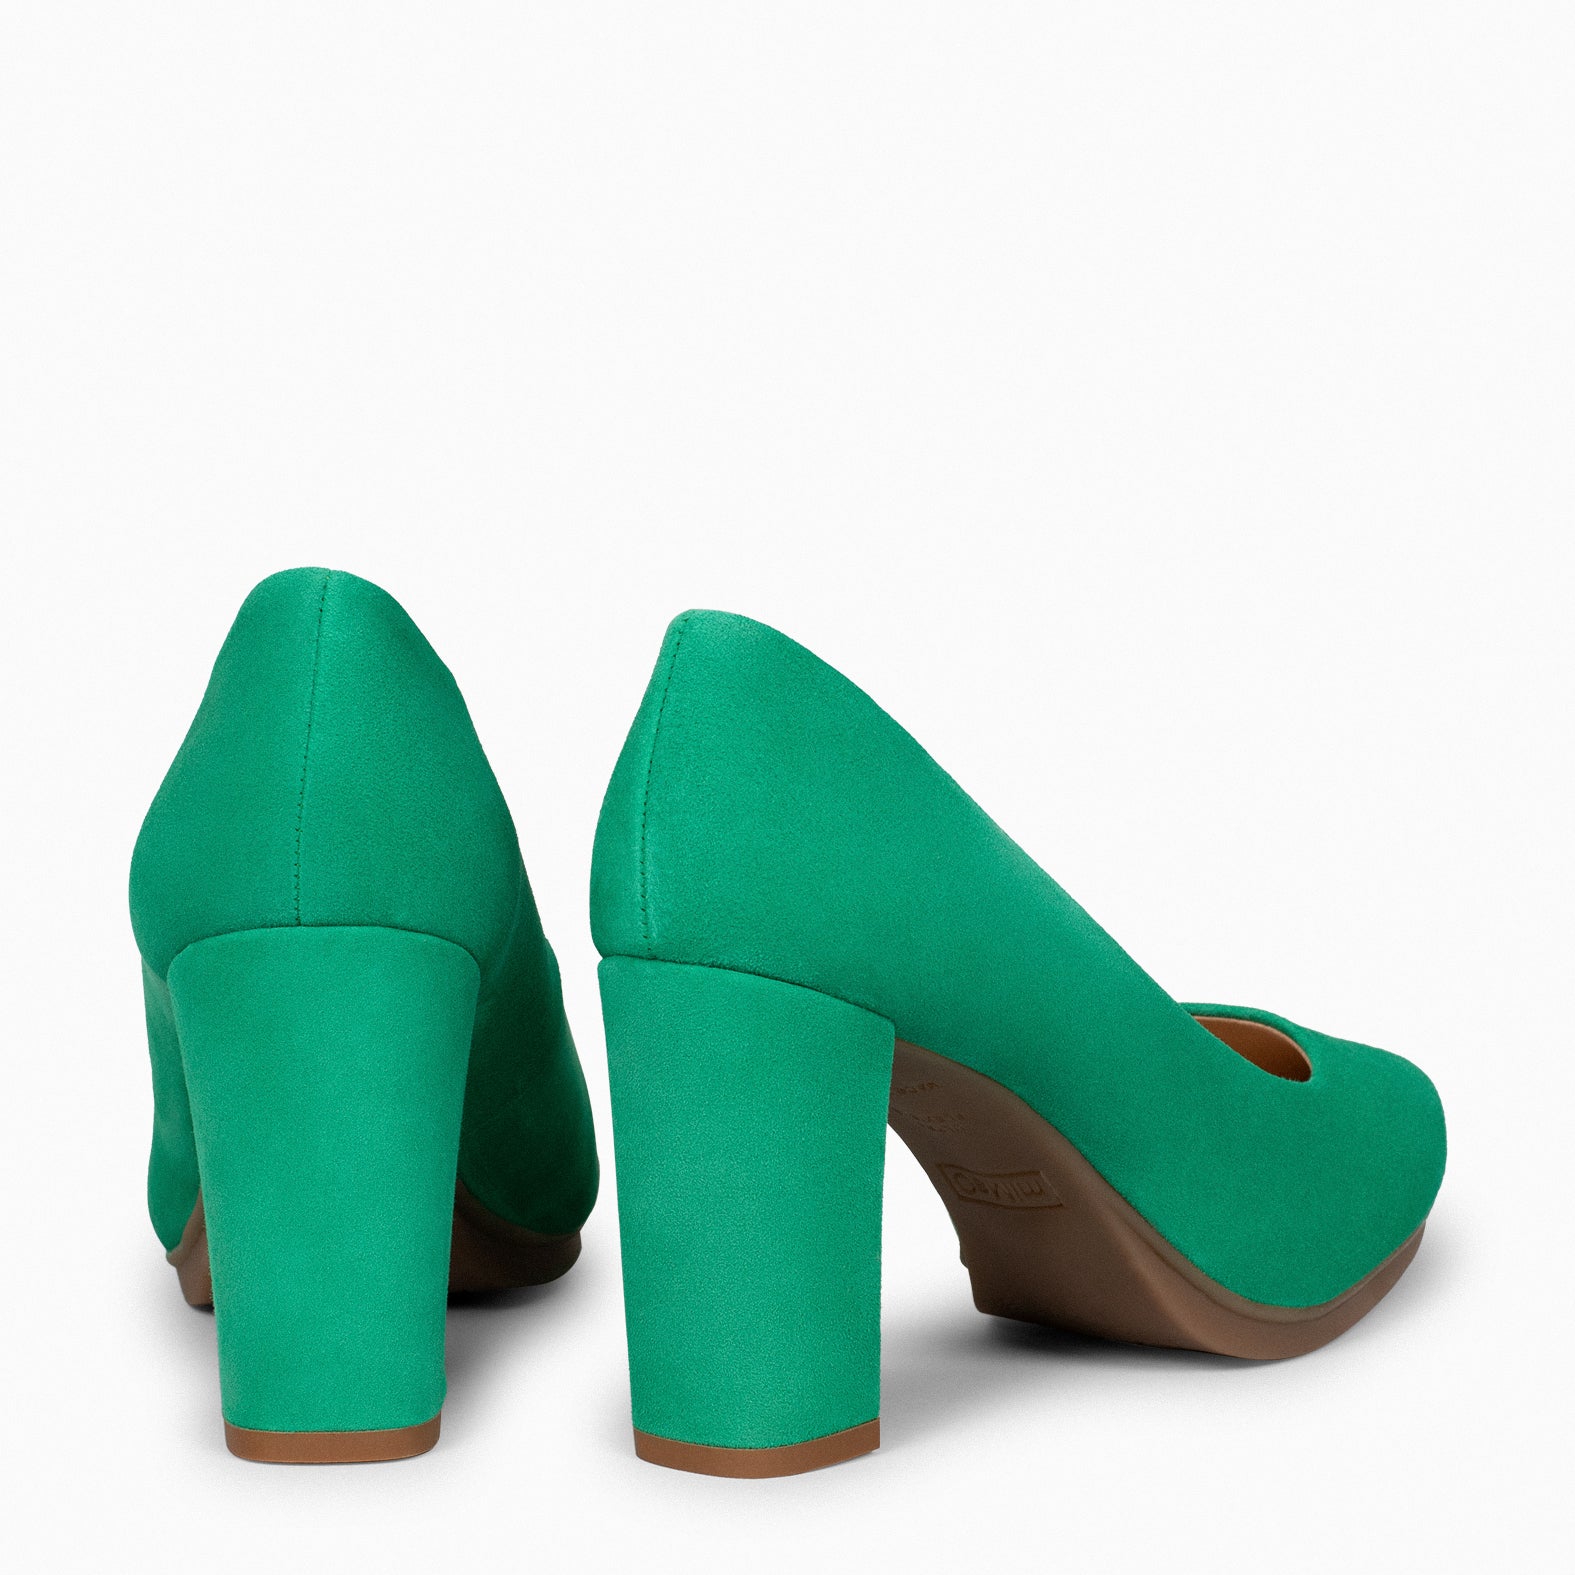 URBAN – GREEN Suede high-heeled shoes 